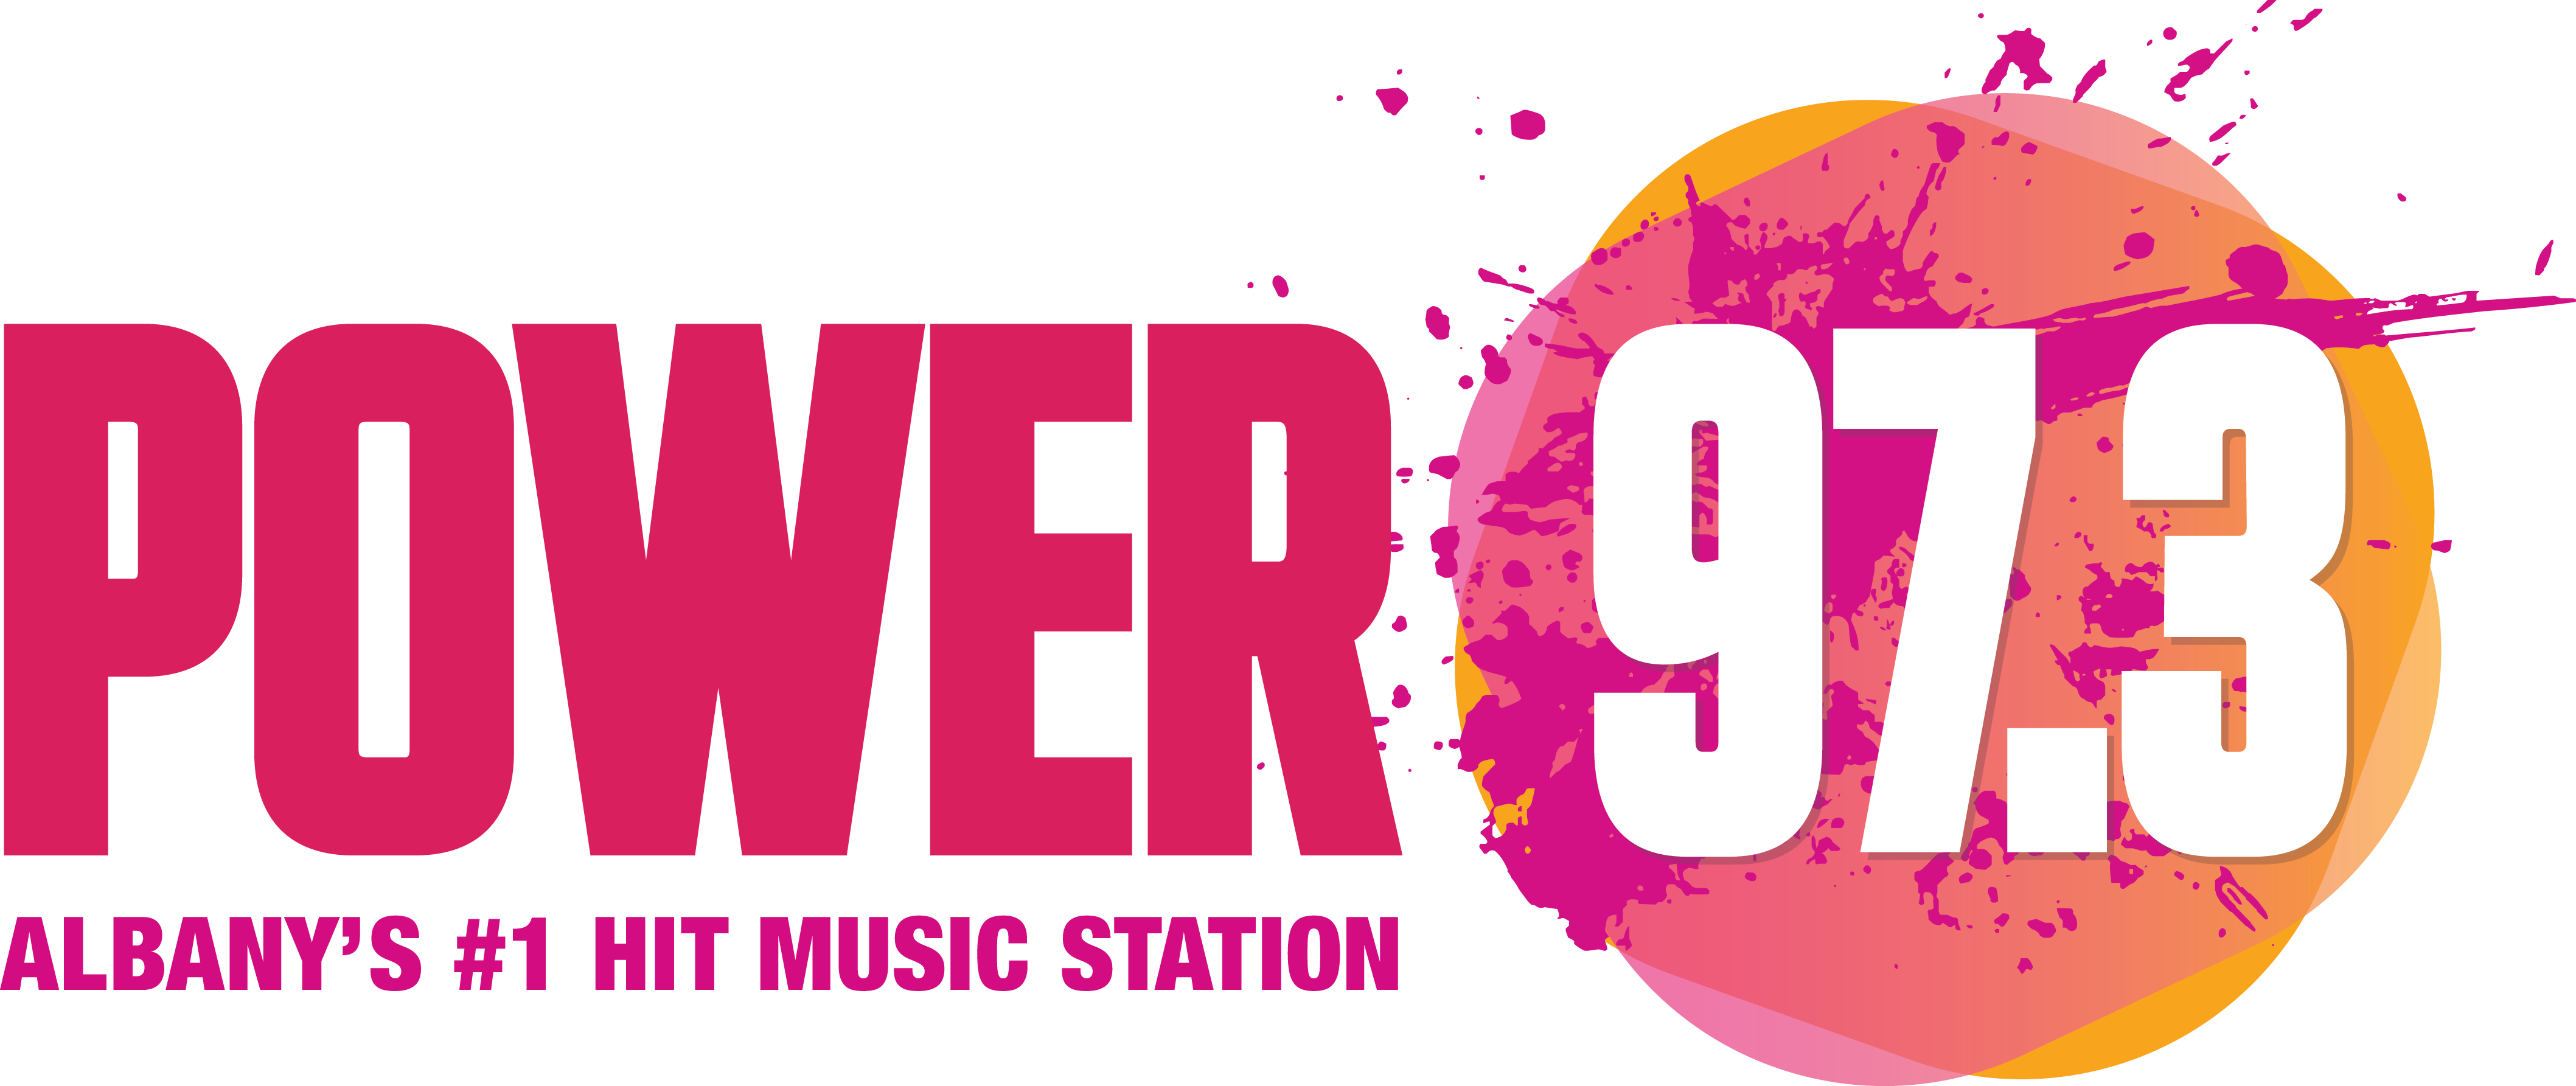 Stream Vibes FM 97.3 music  Listen to songs, albums, playlists